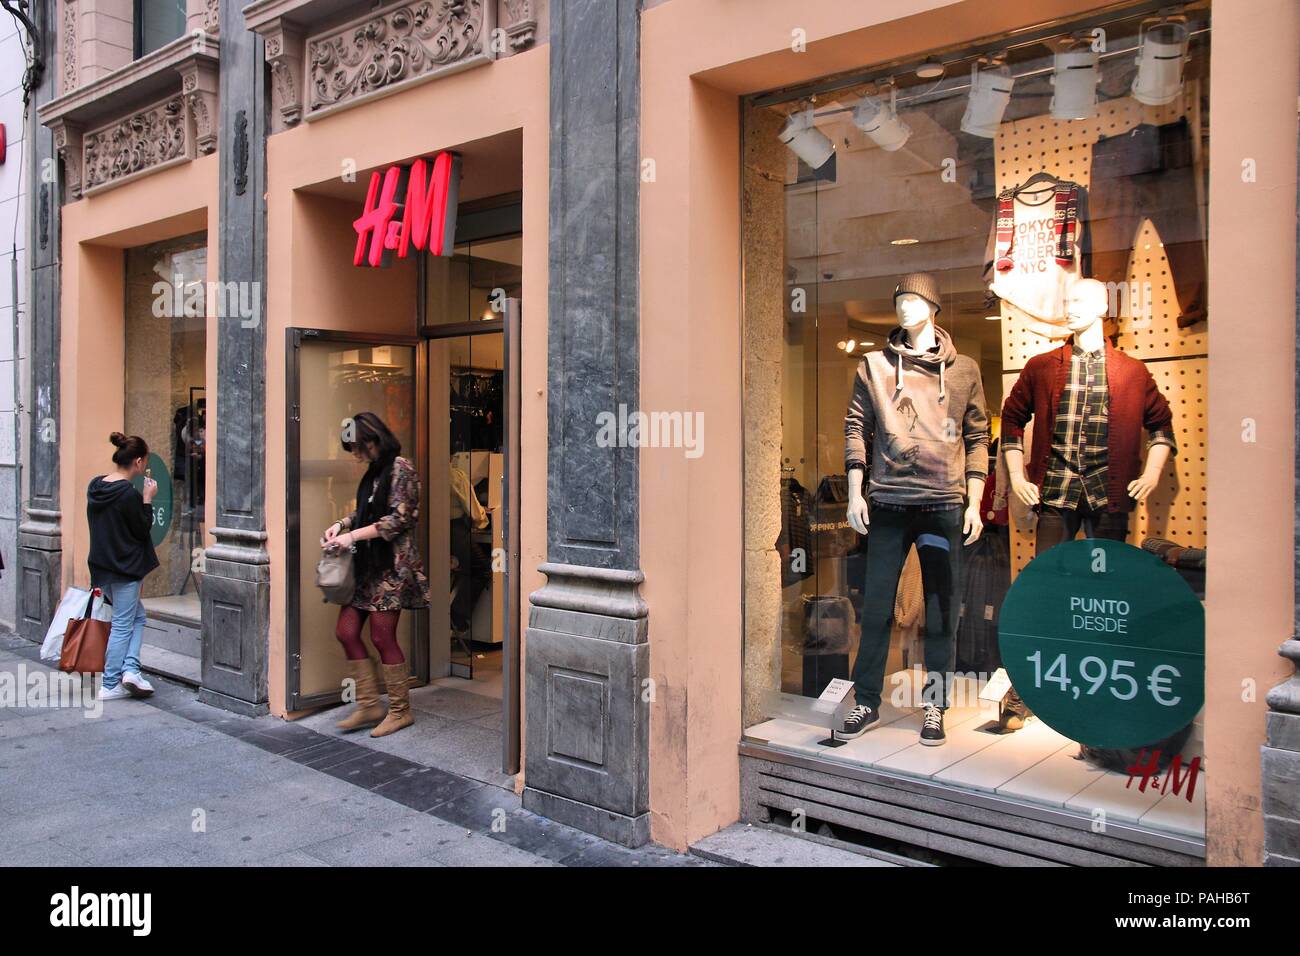 MADRID - OCTOBER 24: People shop at H&M store on October 24, 2012 in  Madrid. H&M is an international fashion retail corp known for its fast  fashion ap Stock Photo - Alamy